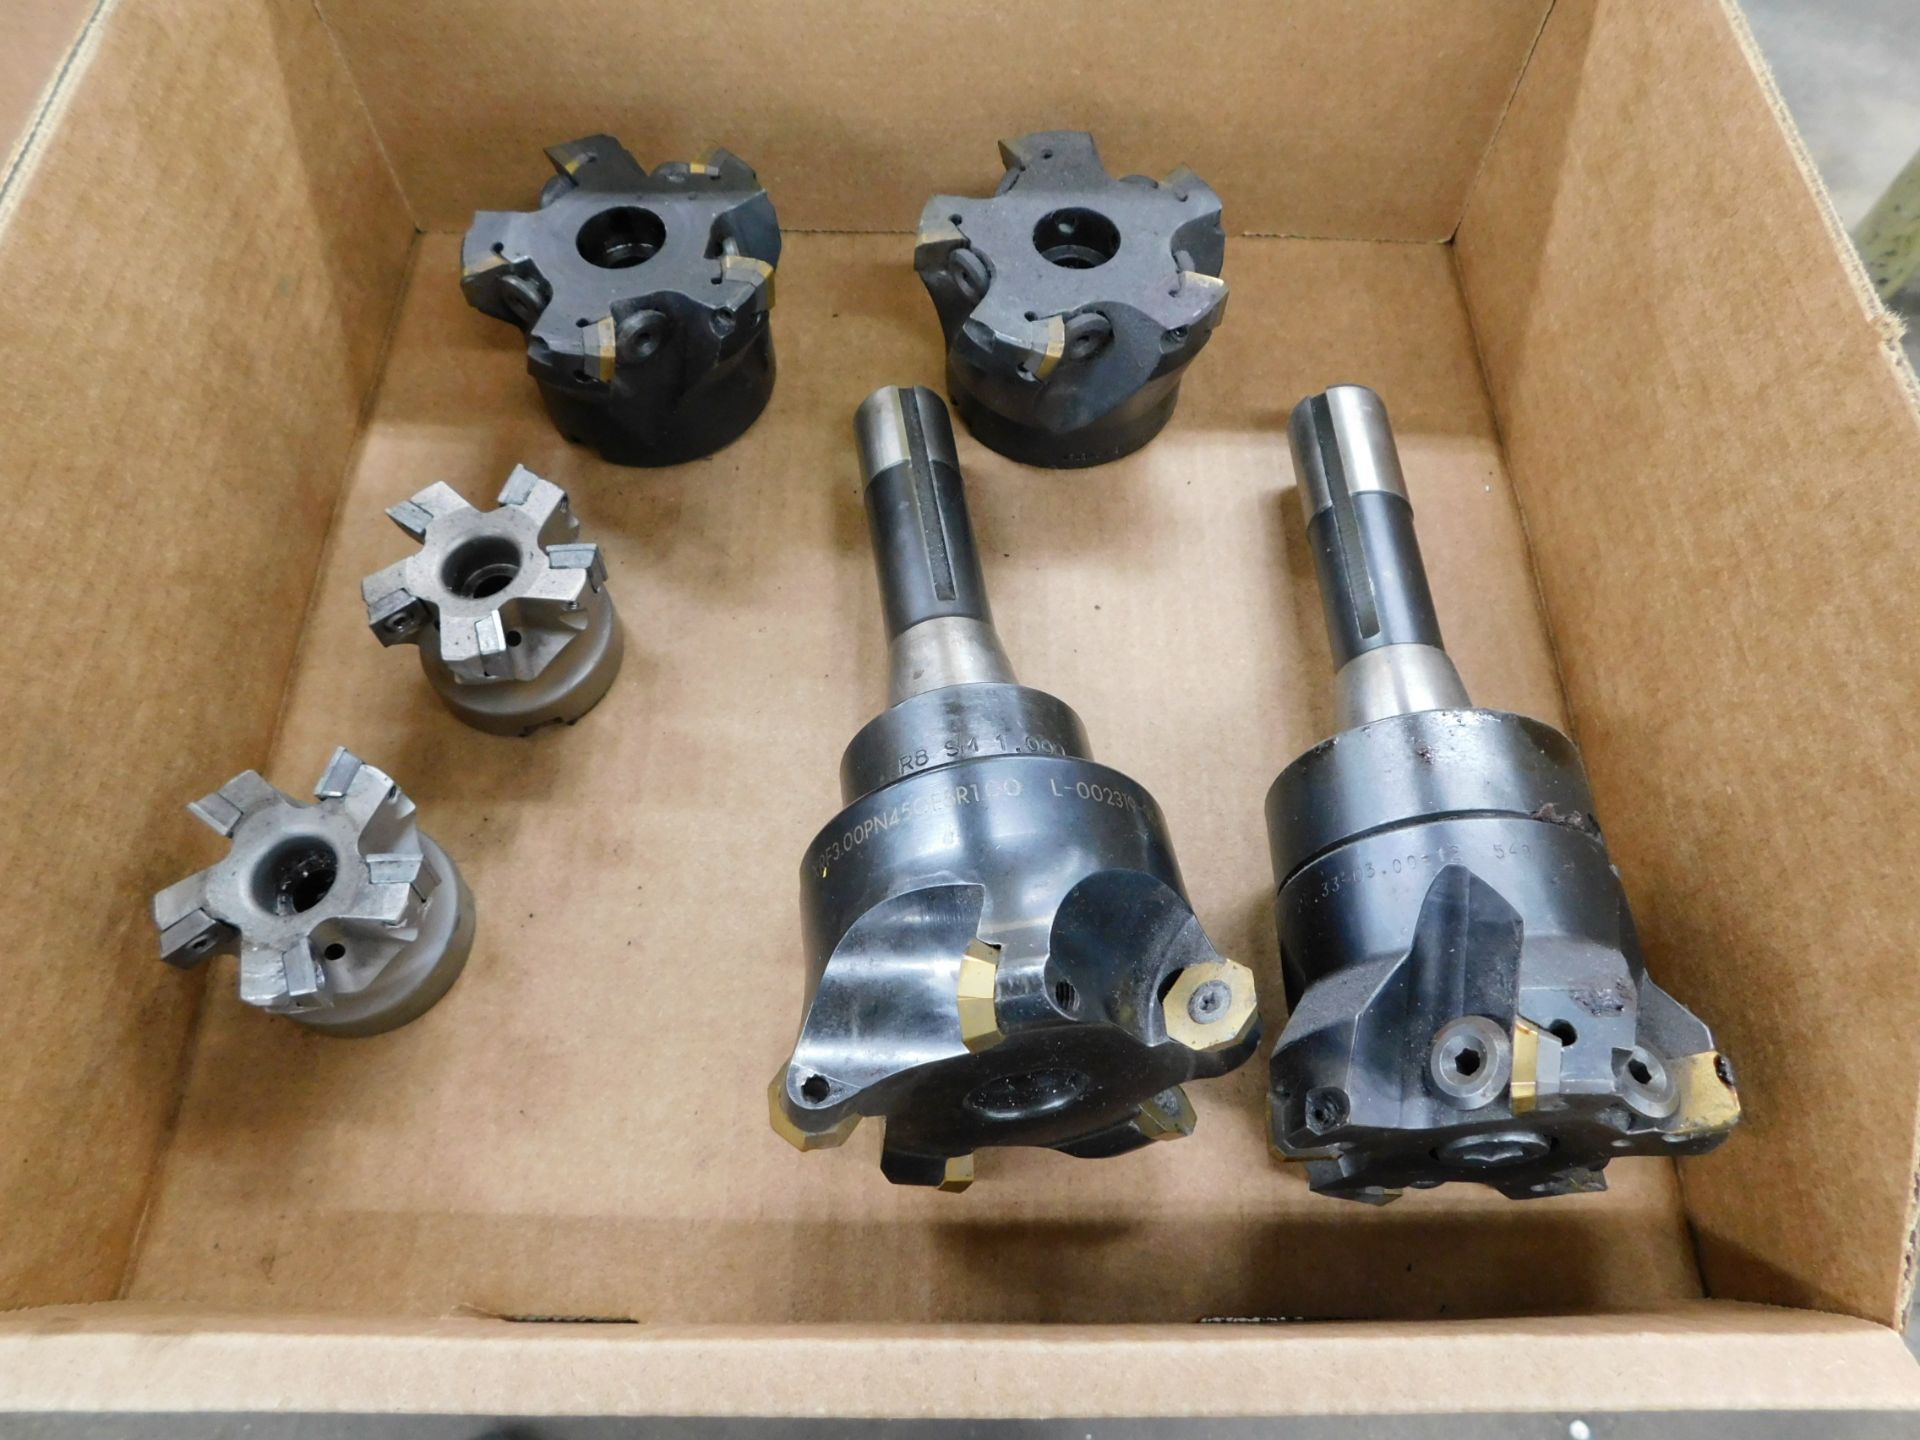 R-8 Face Mill Cutters